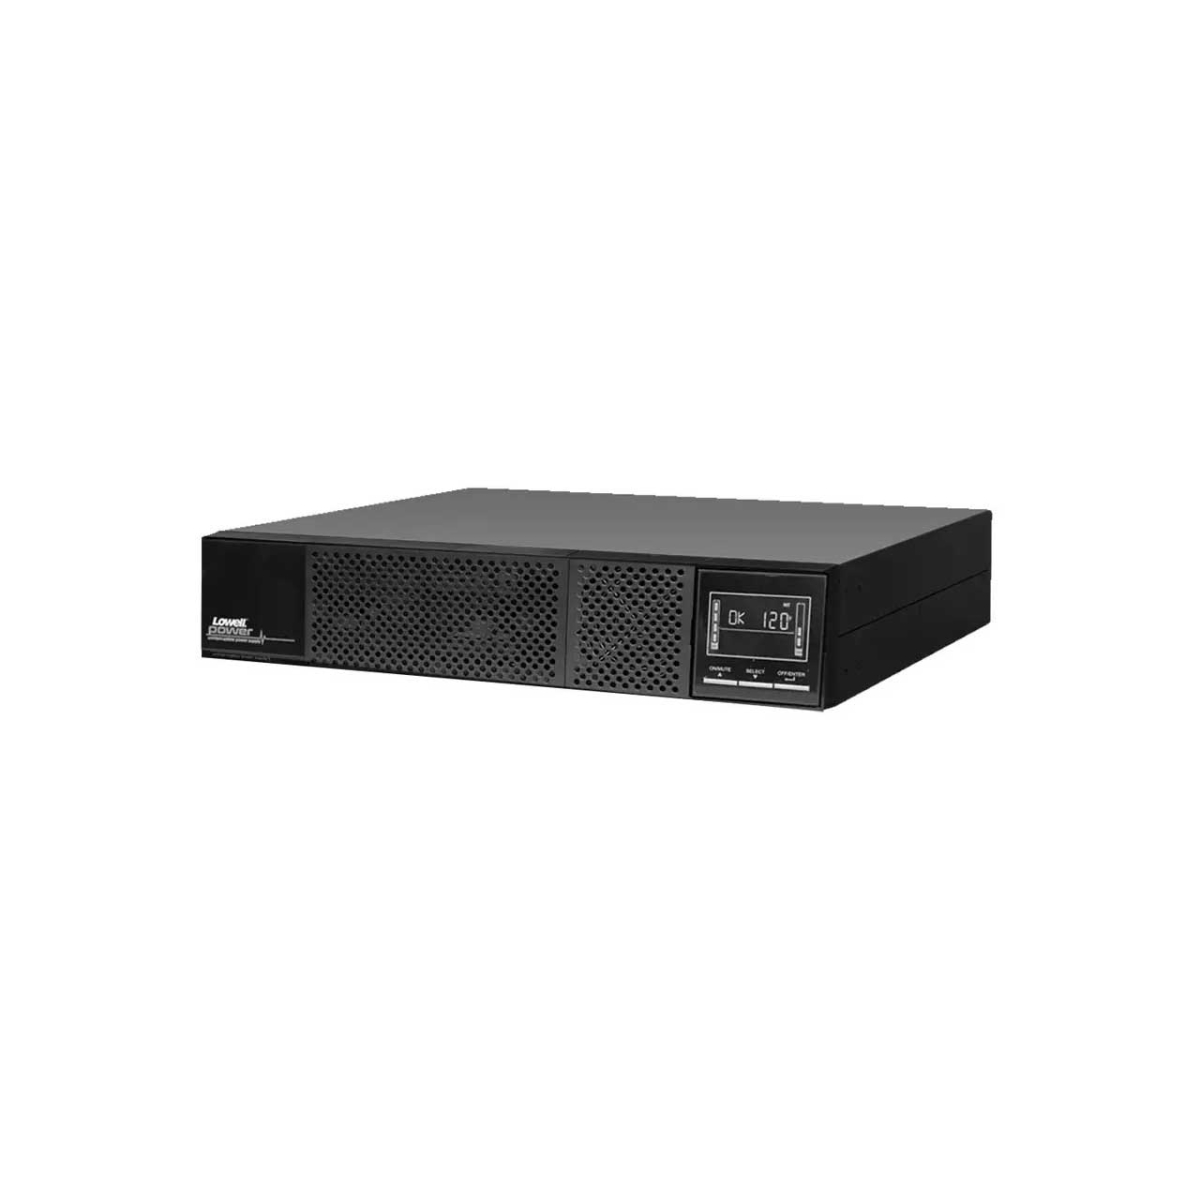 Picture of Lowell Manufacturing LMC-UPS9A-1000IP 1000VA 1000 watt UPS9A-1000-IP Online Power Conditioner - UPS with SNMP Remote Monitoring